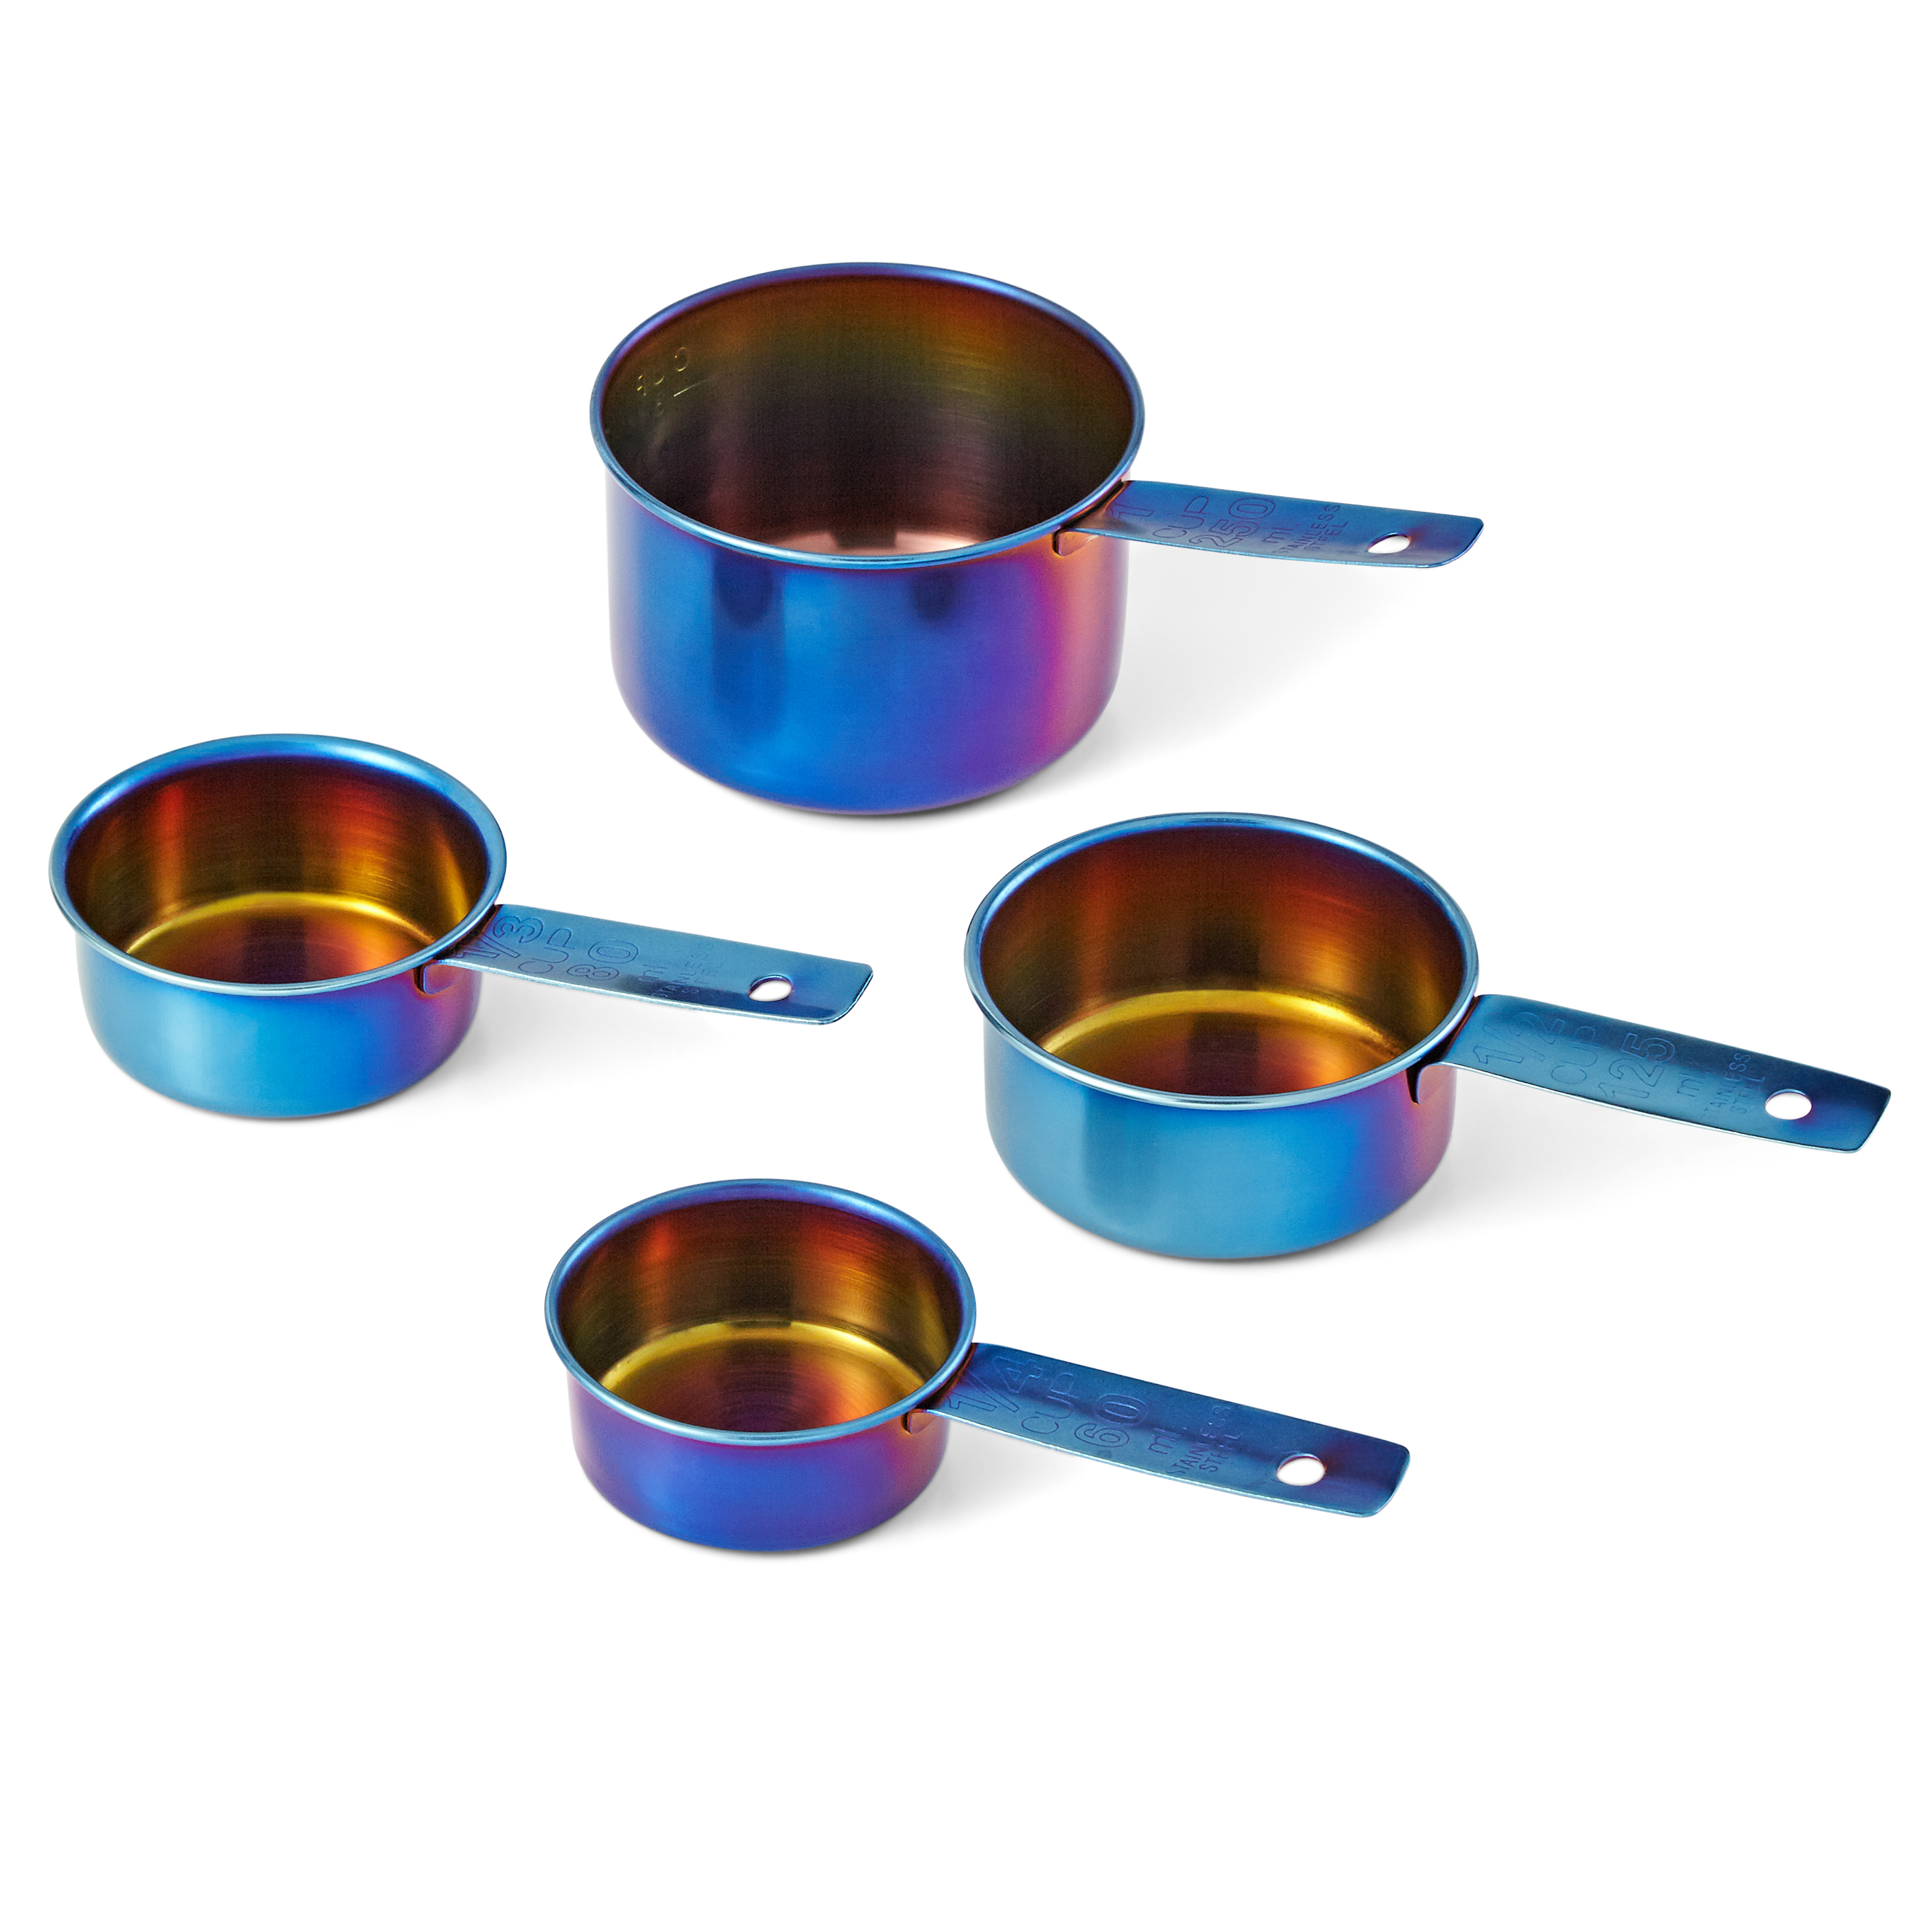 Mainstays Iridescent Stainless Steel 20-Piece Cookware Set, with Kitchen Utensils and Tools - image 4 of 9